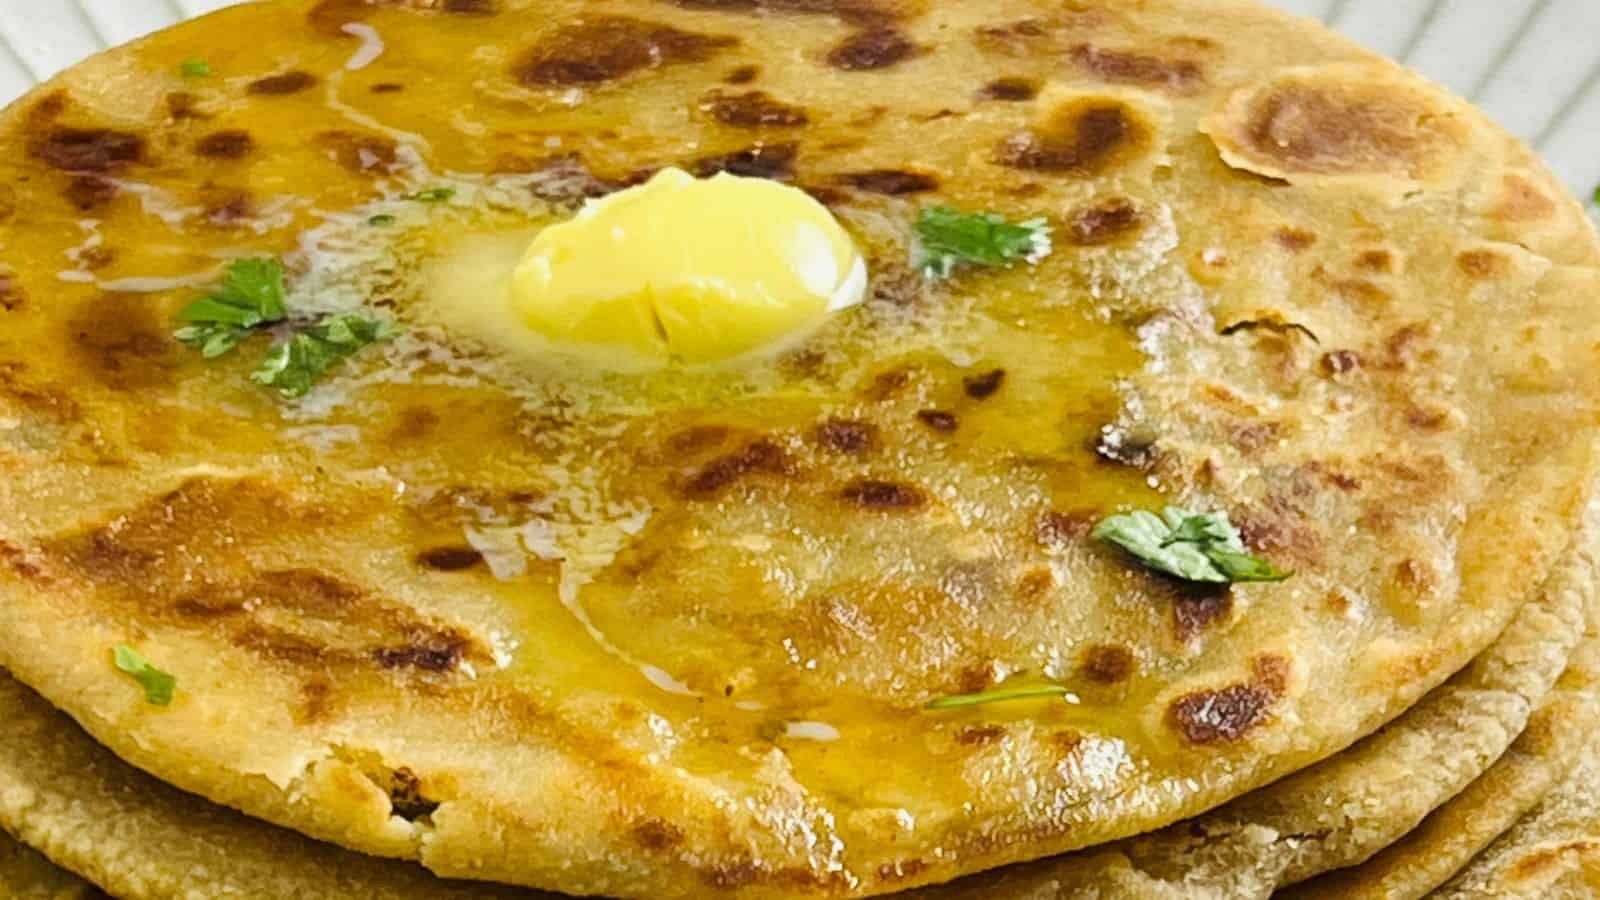 Close-up image of aloo paratha, an indian stuffed flatbread, topped with a pat of melting butter and sprinkled with fresh herbs.